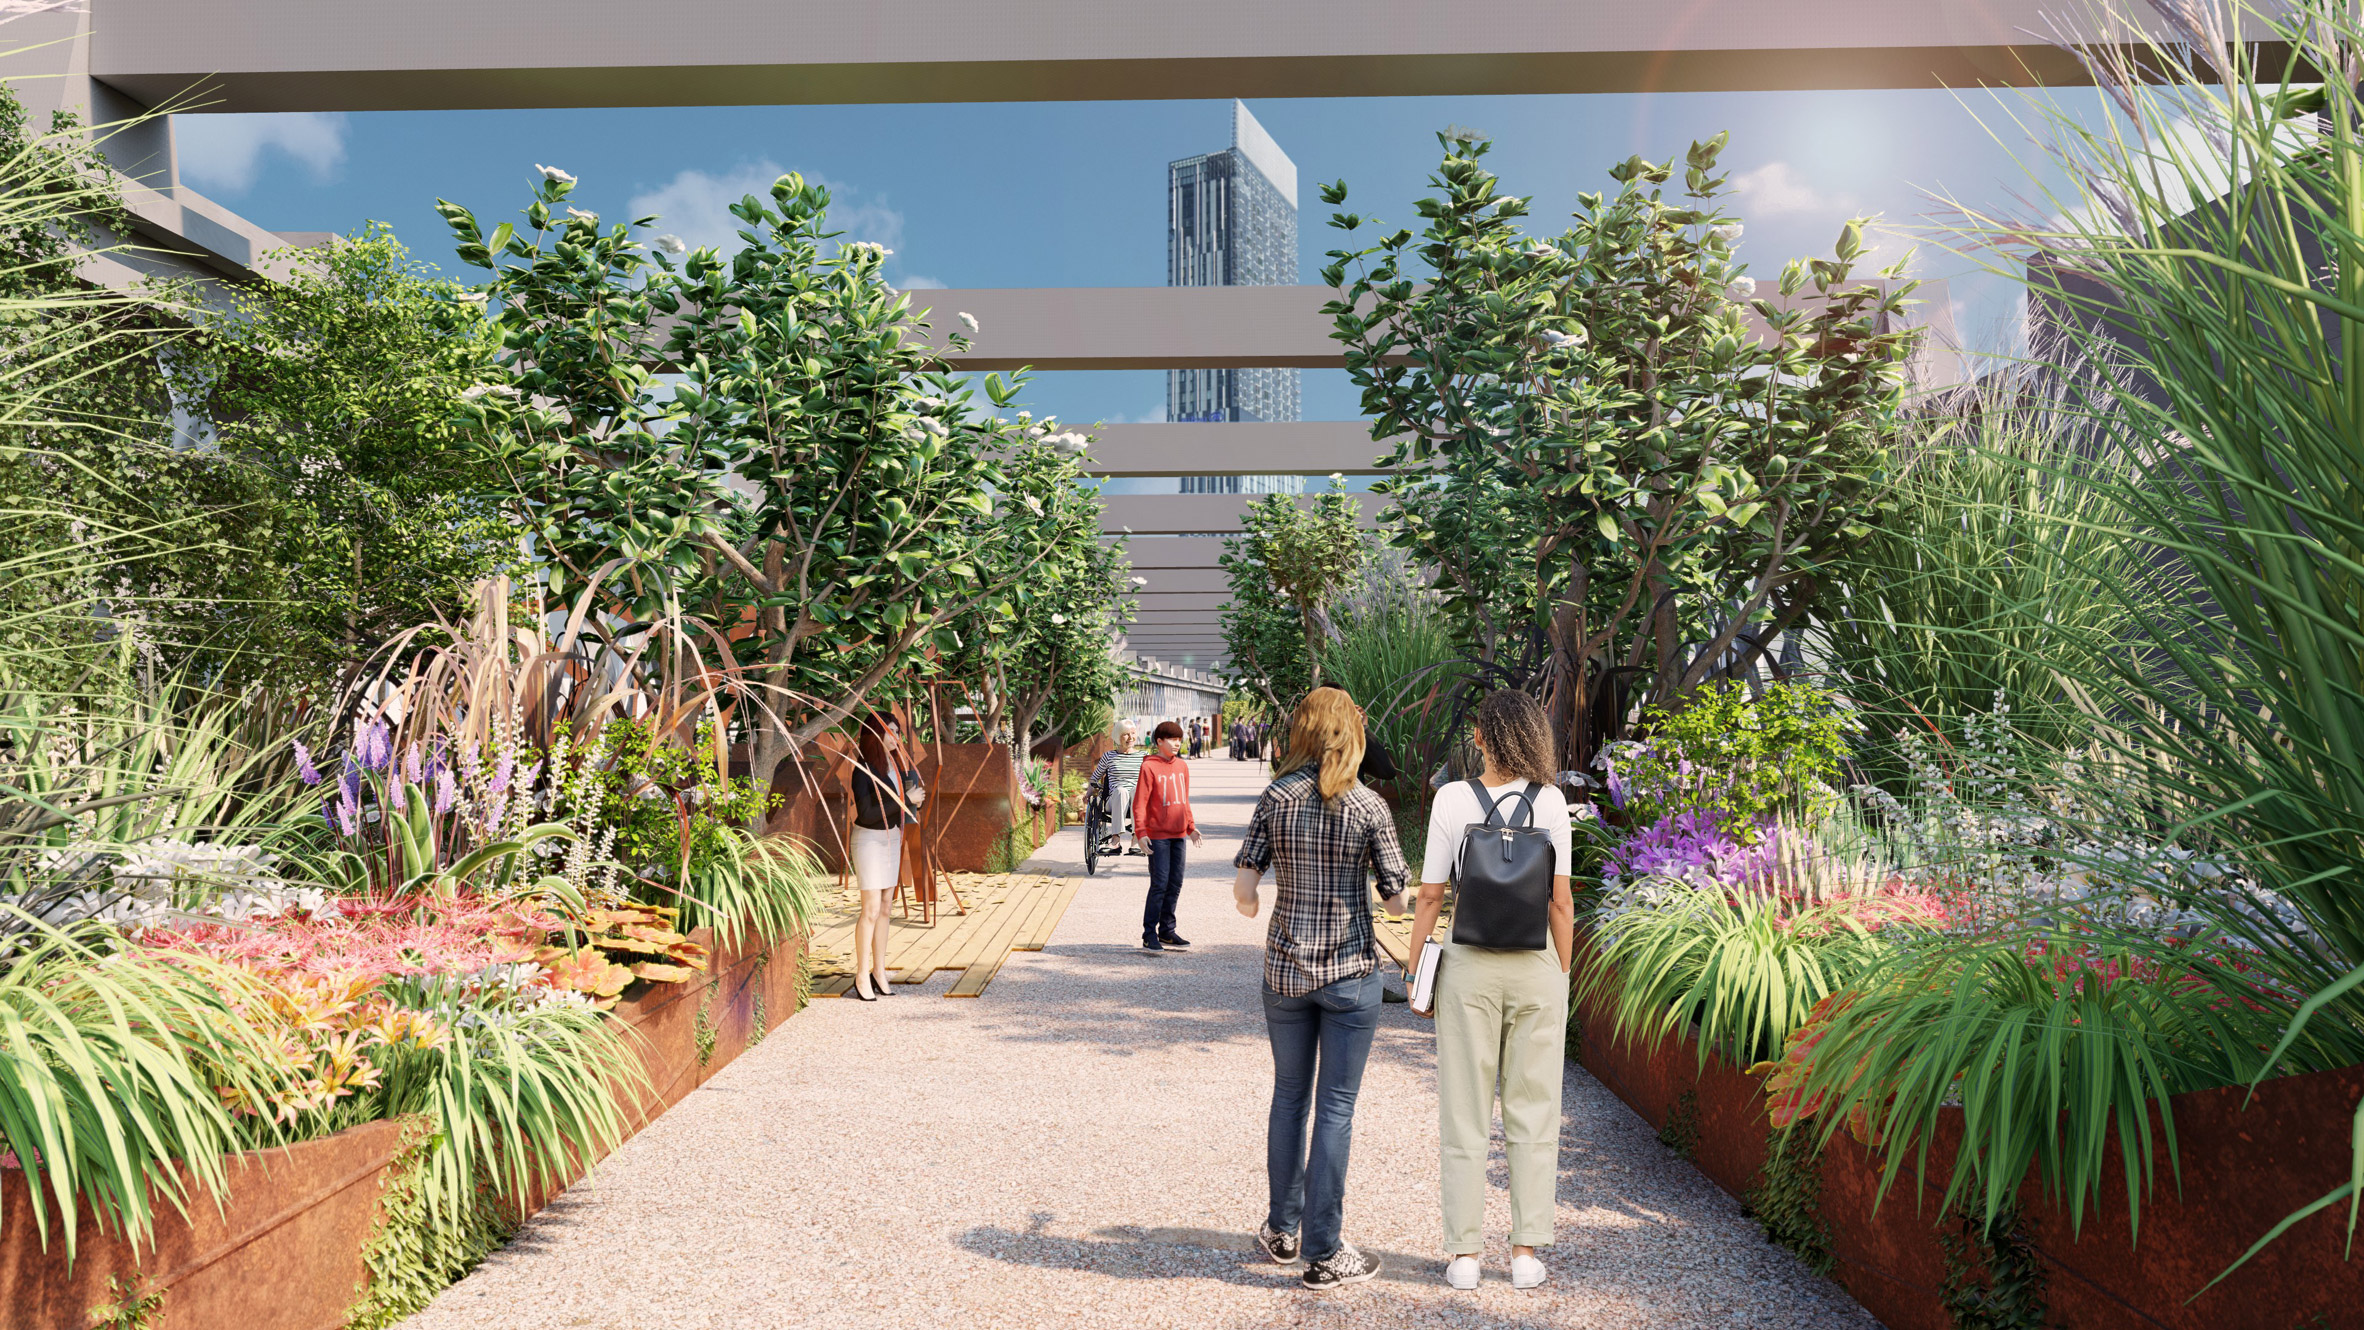 Steel planters will be placed across the viaduct